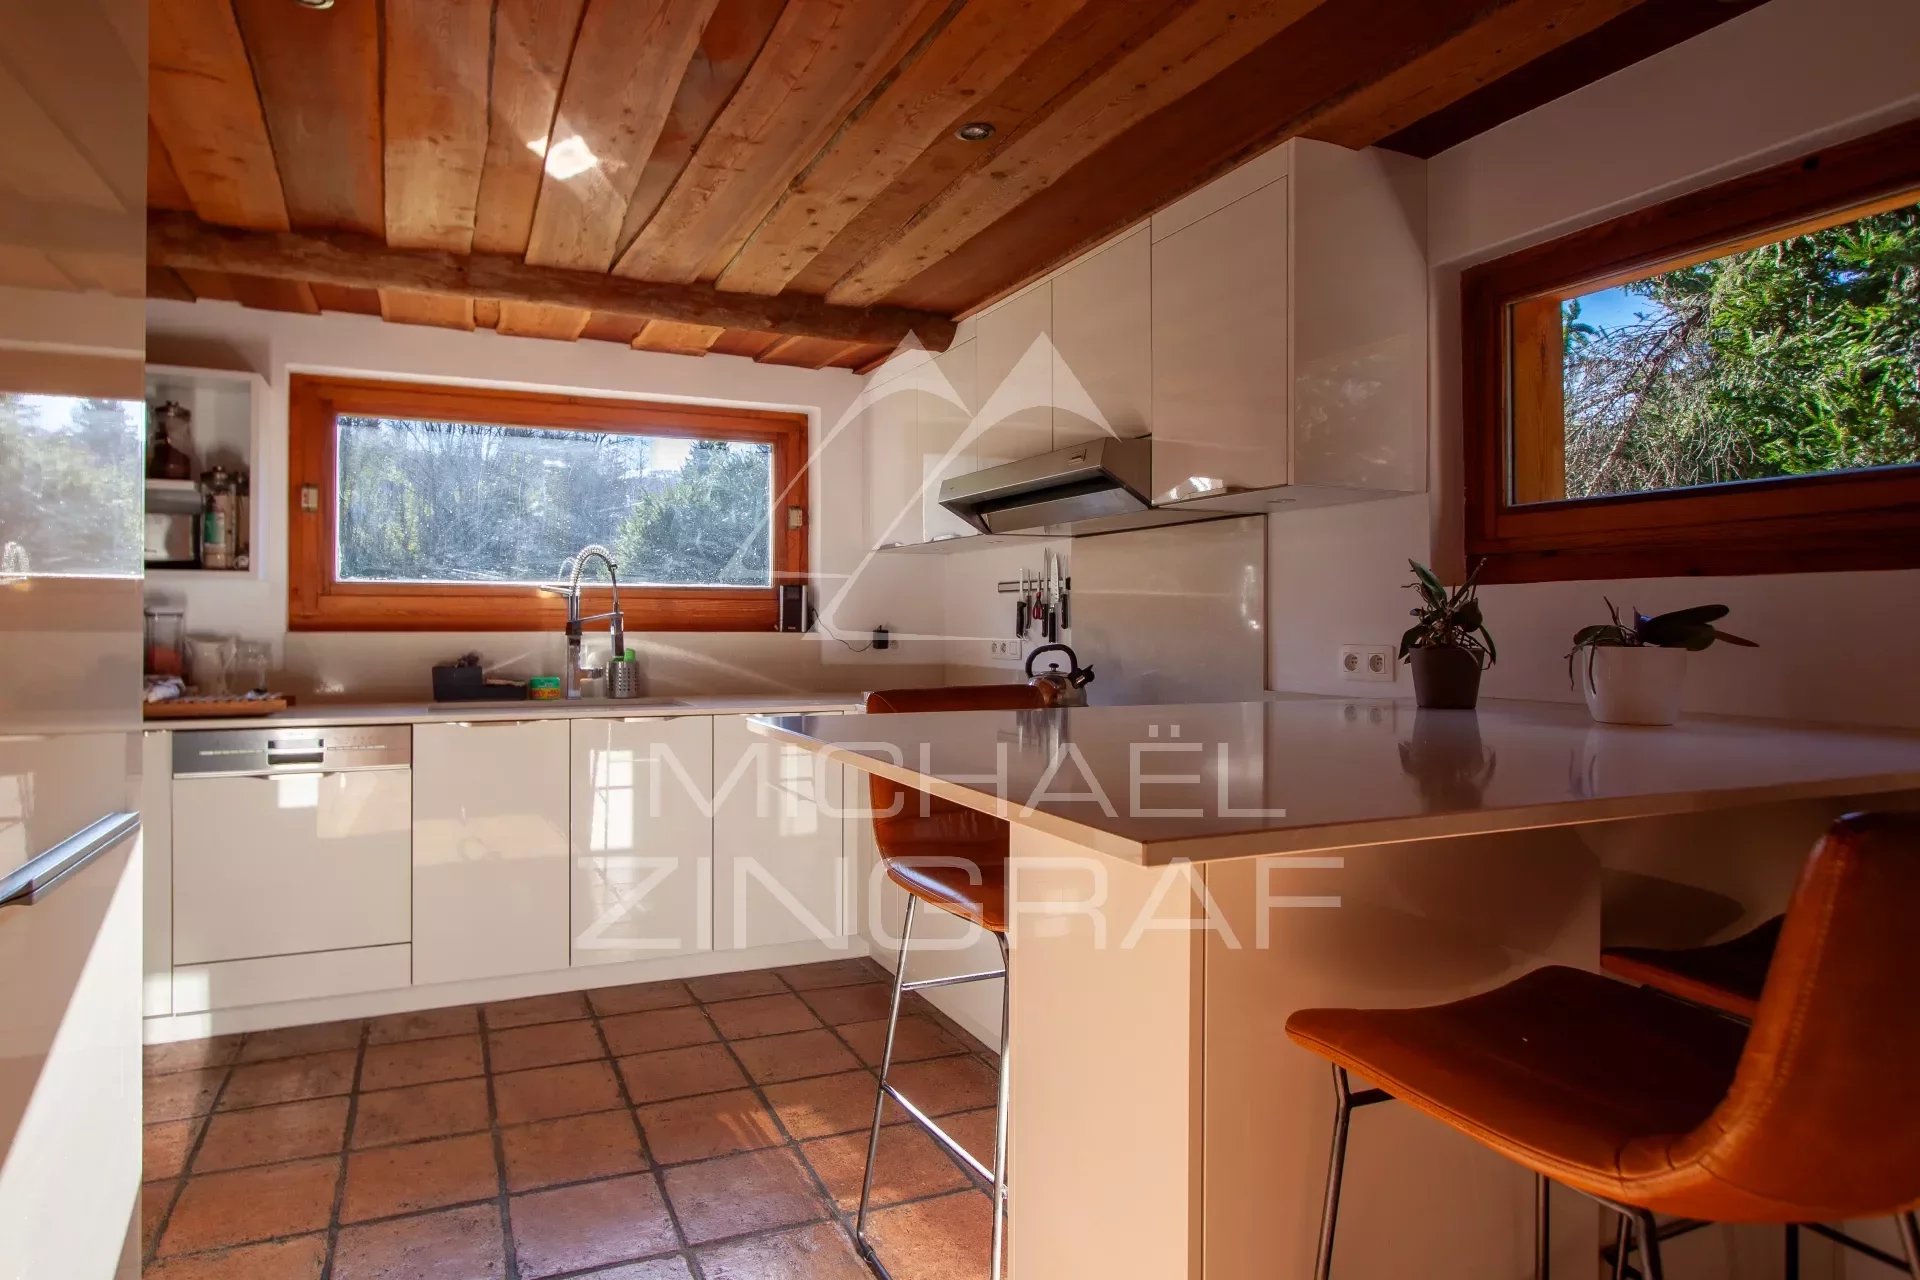 Les Houches - 5 bedrooms chalet